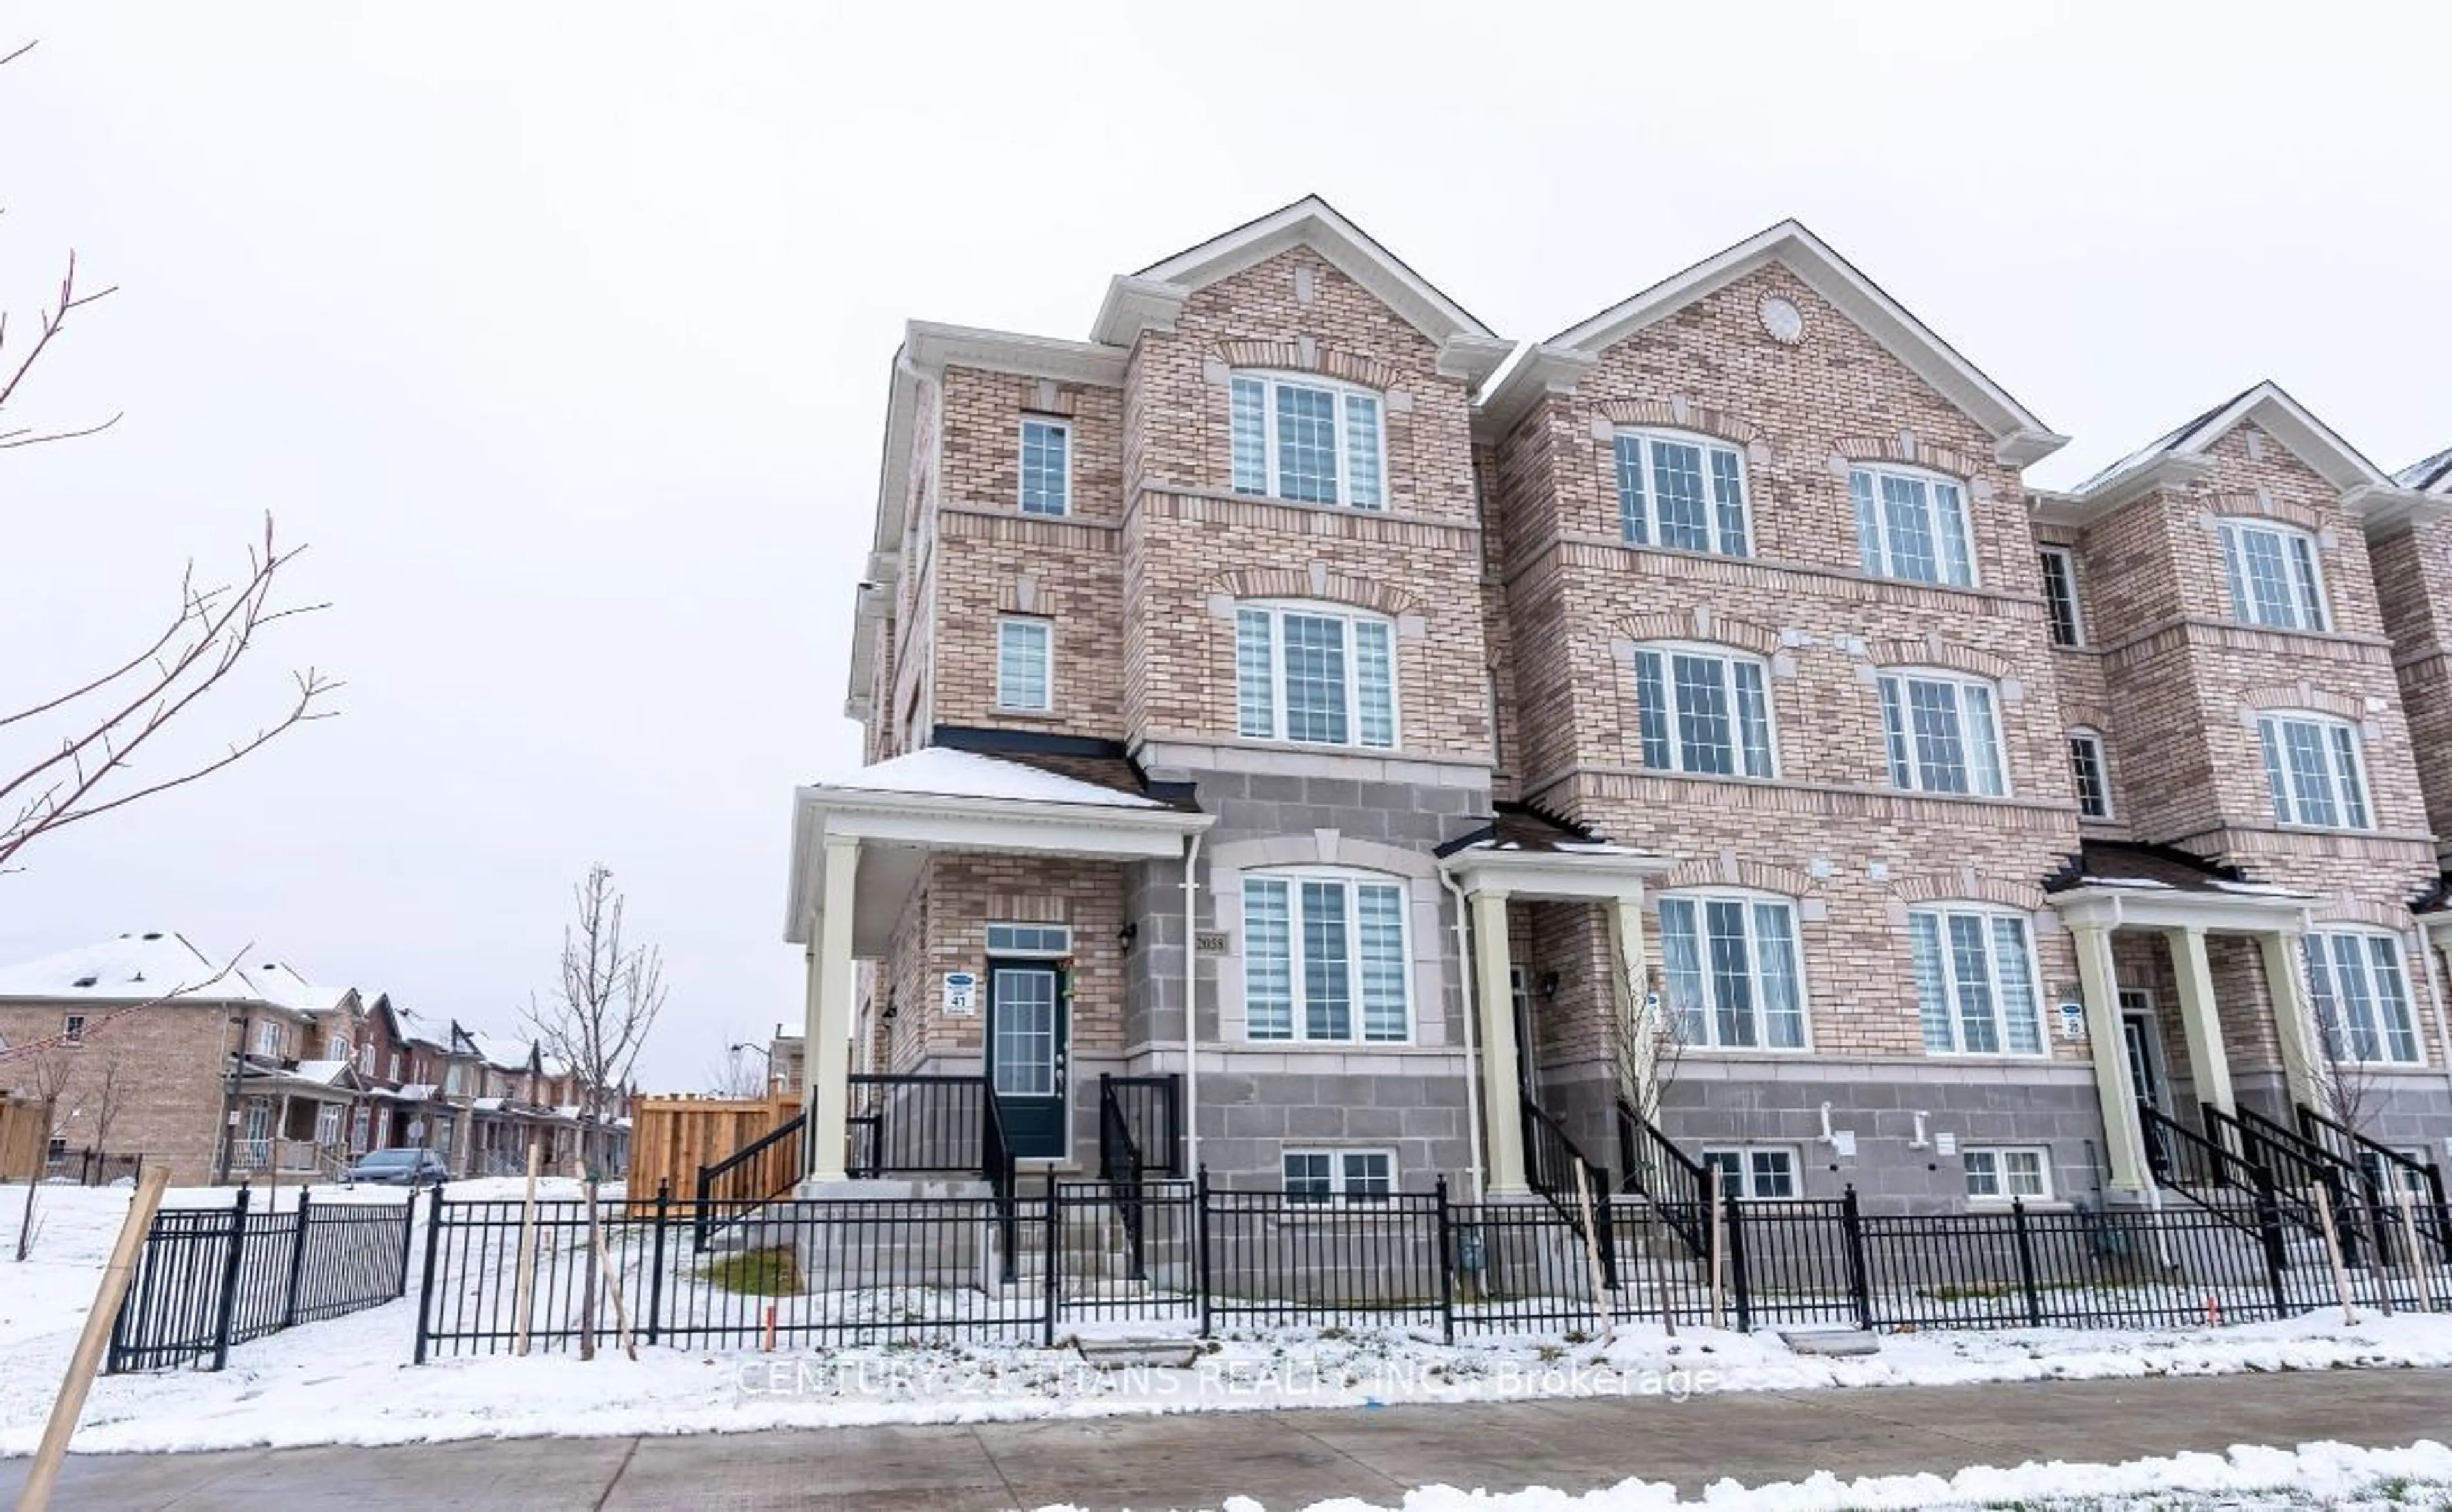 A pic from exterior of the house or condo for 2058 Donald Cousens Pkwy, Markham Ontario L6B 0Z3